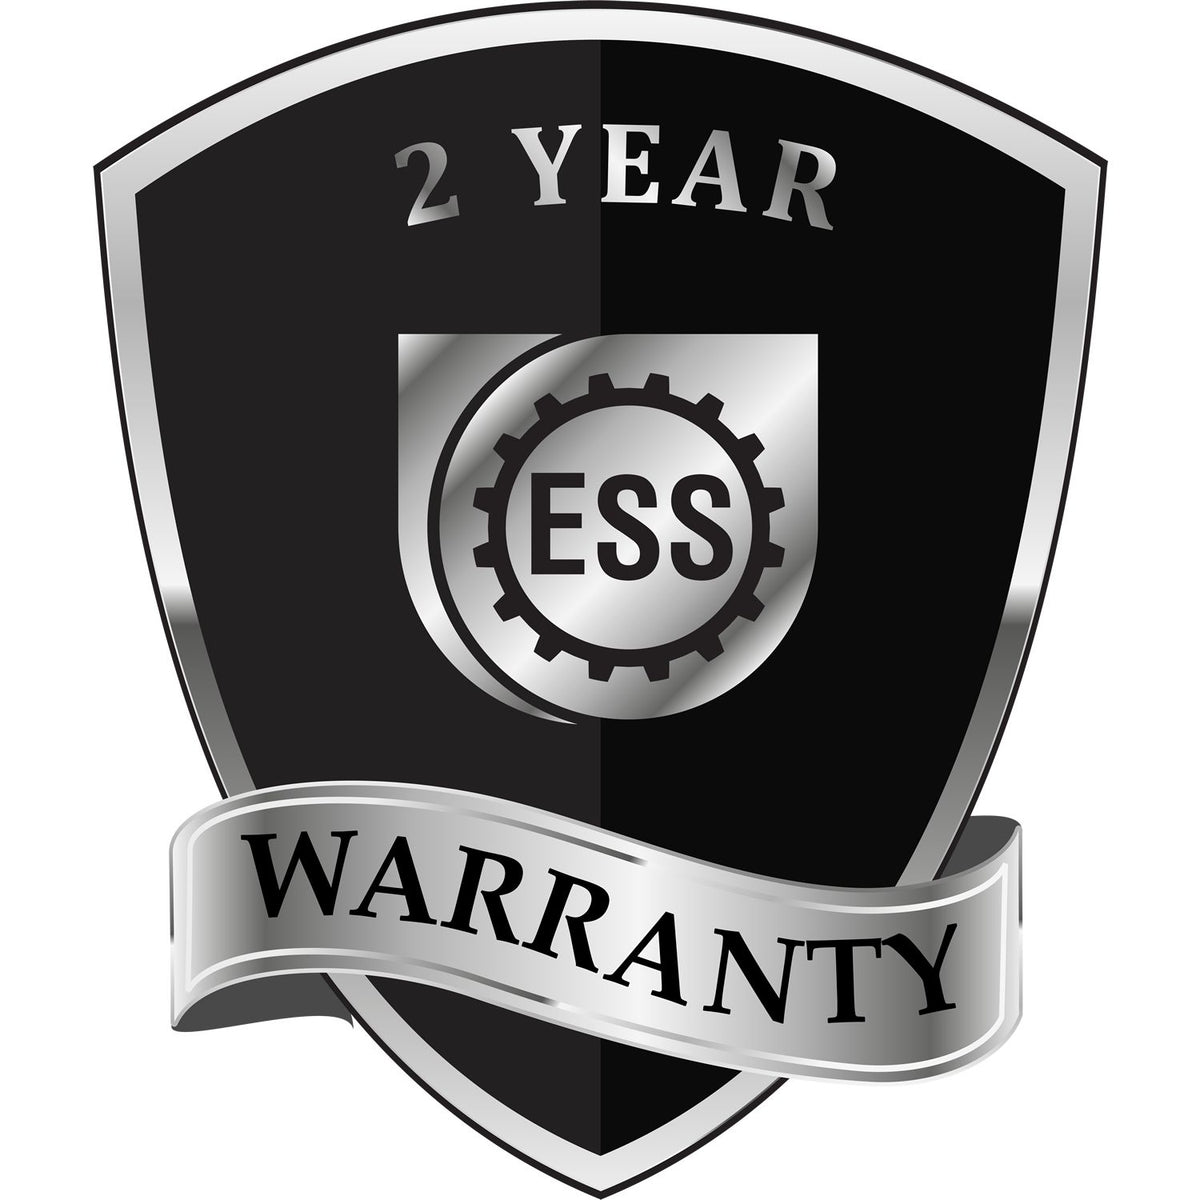 A black and silver badge or emblem showing warranty information for the Heavy Duty Cast Iron Nebraska Geologist Seal Embosser